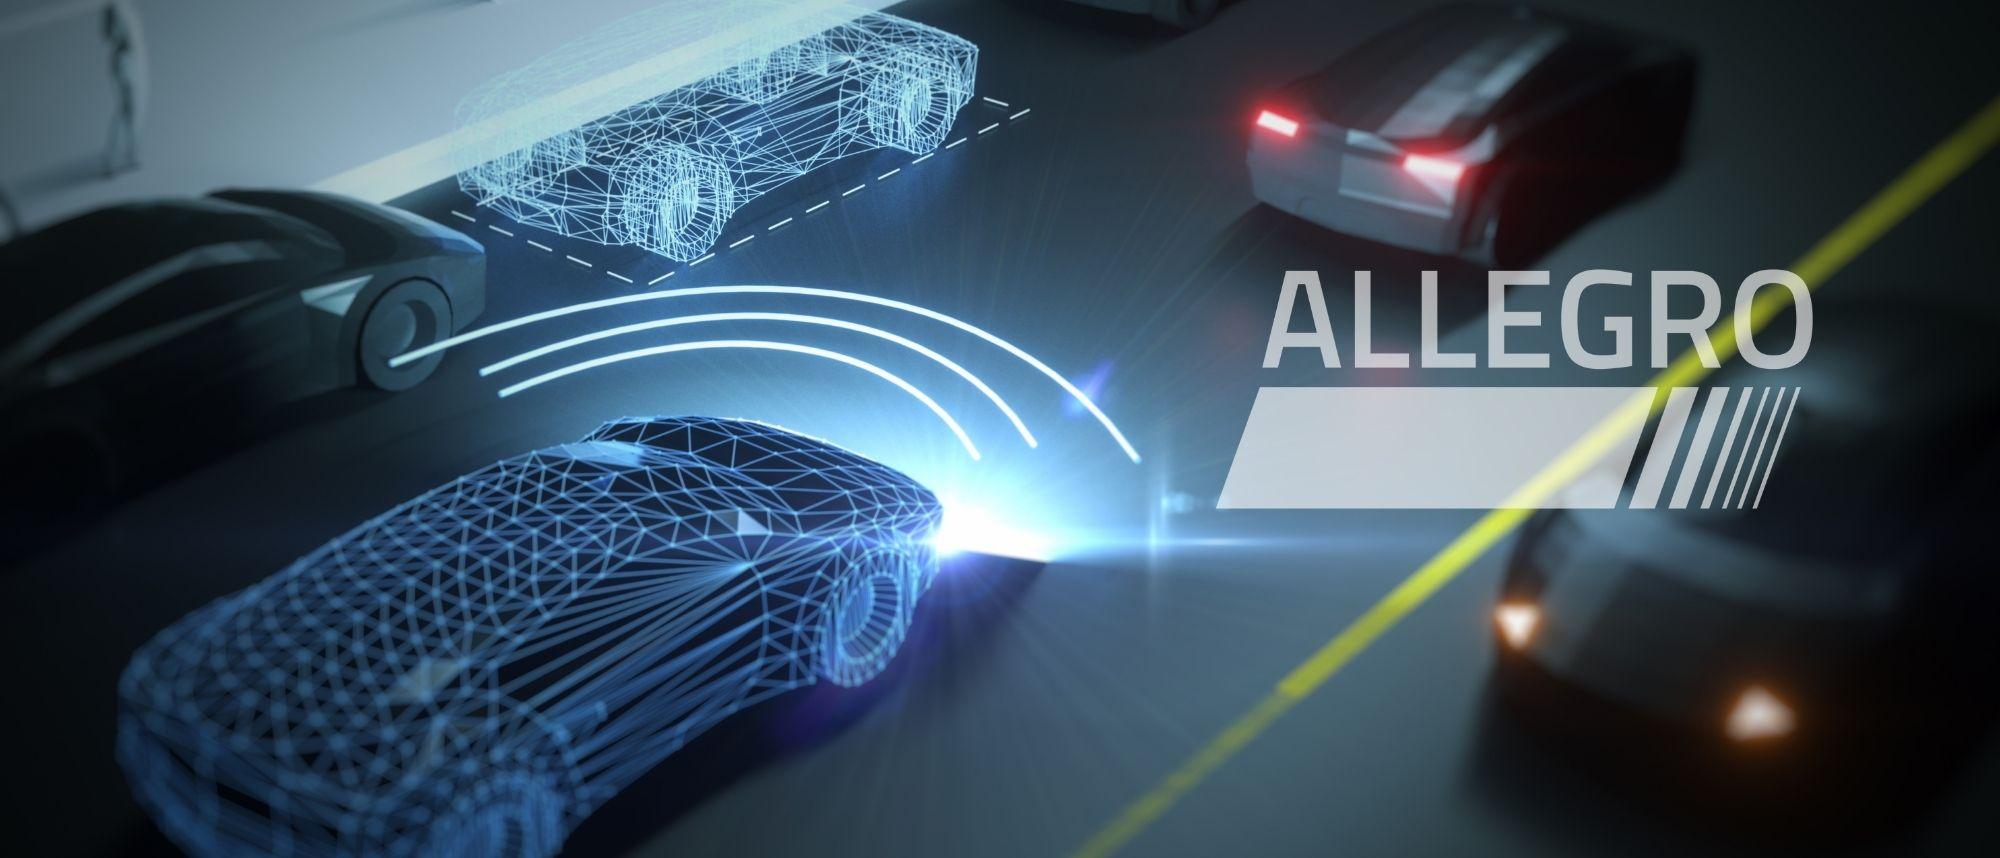 Allegro cleaning solutions for all levels of autonomous vehicles.